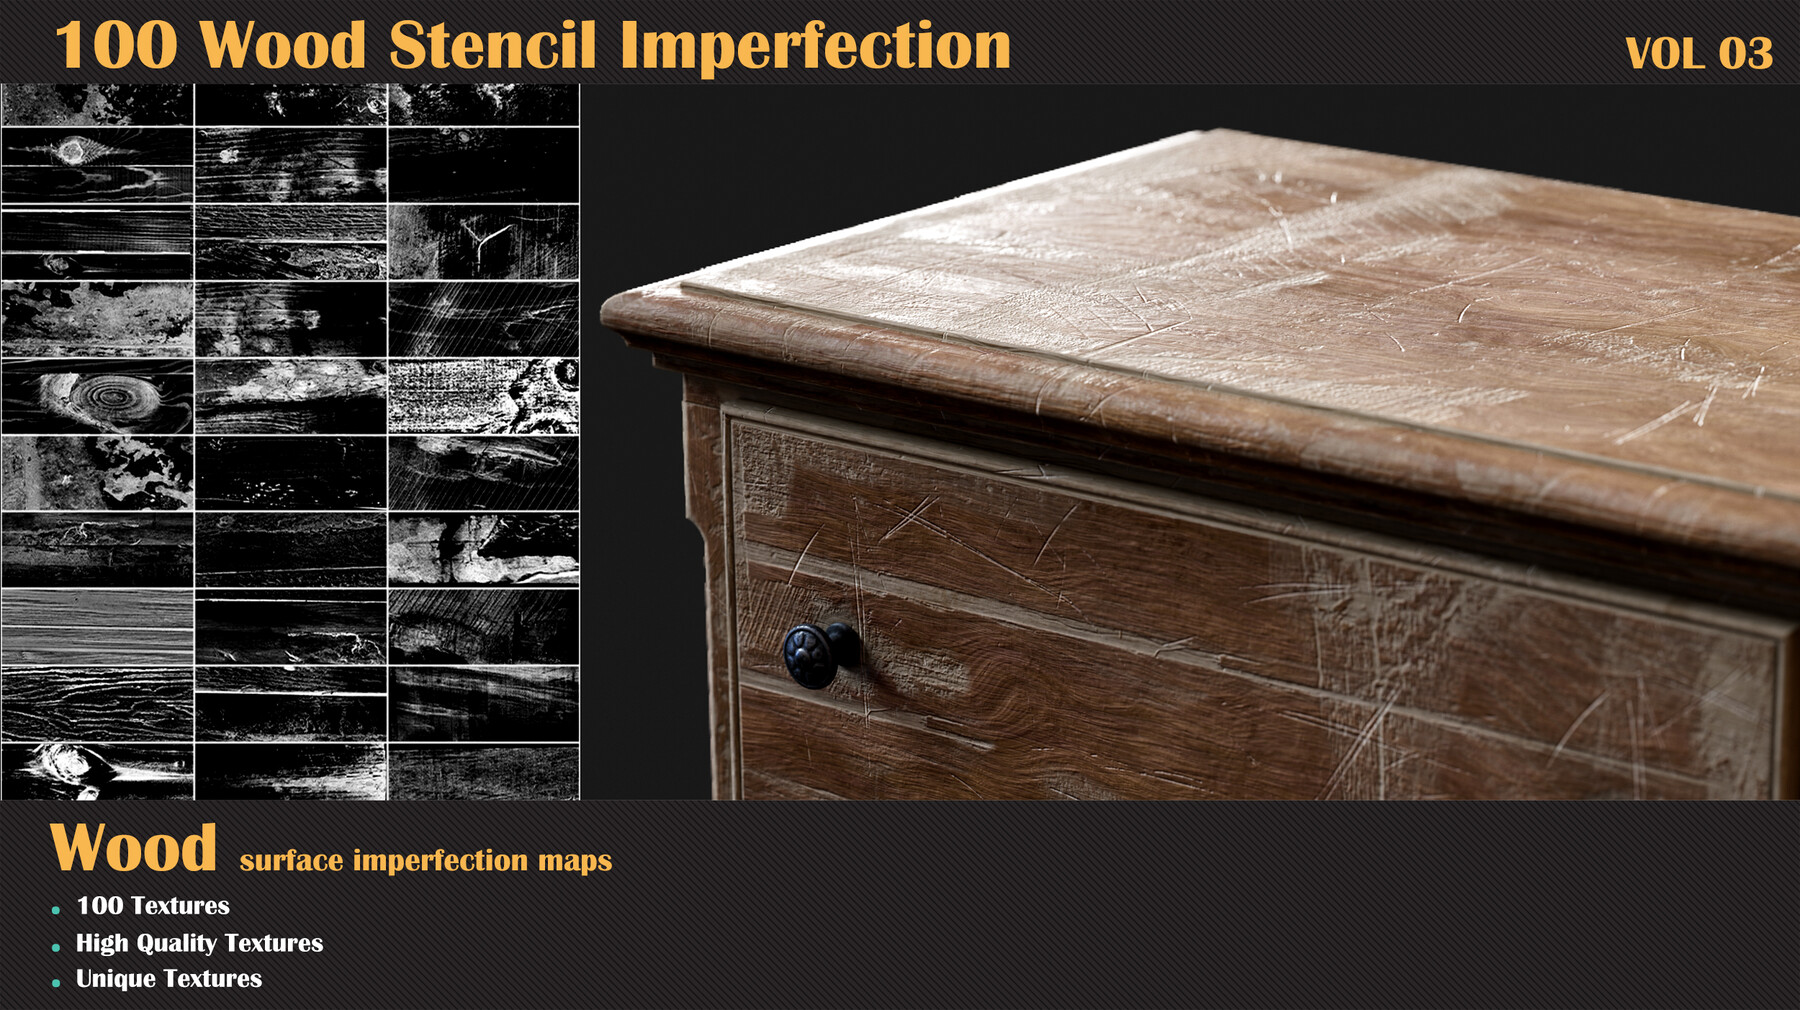 ArtStation - 100 Wood Stencil Imperfection-VOL 03 | Brushes